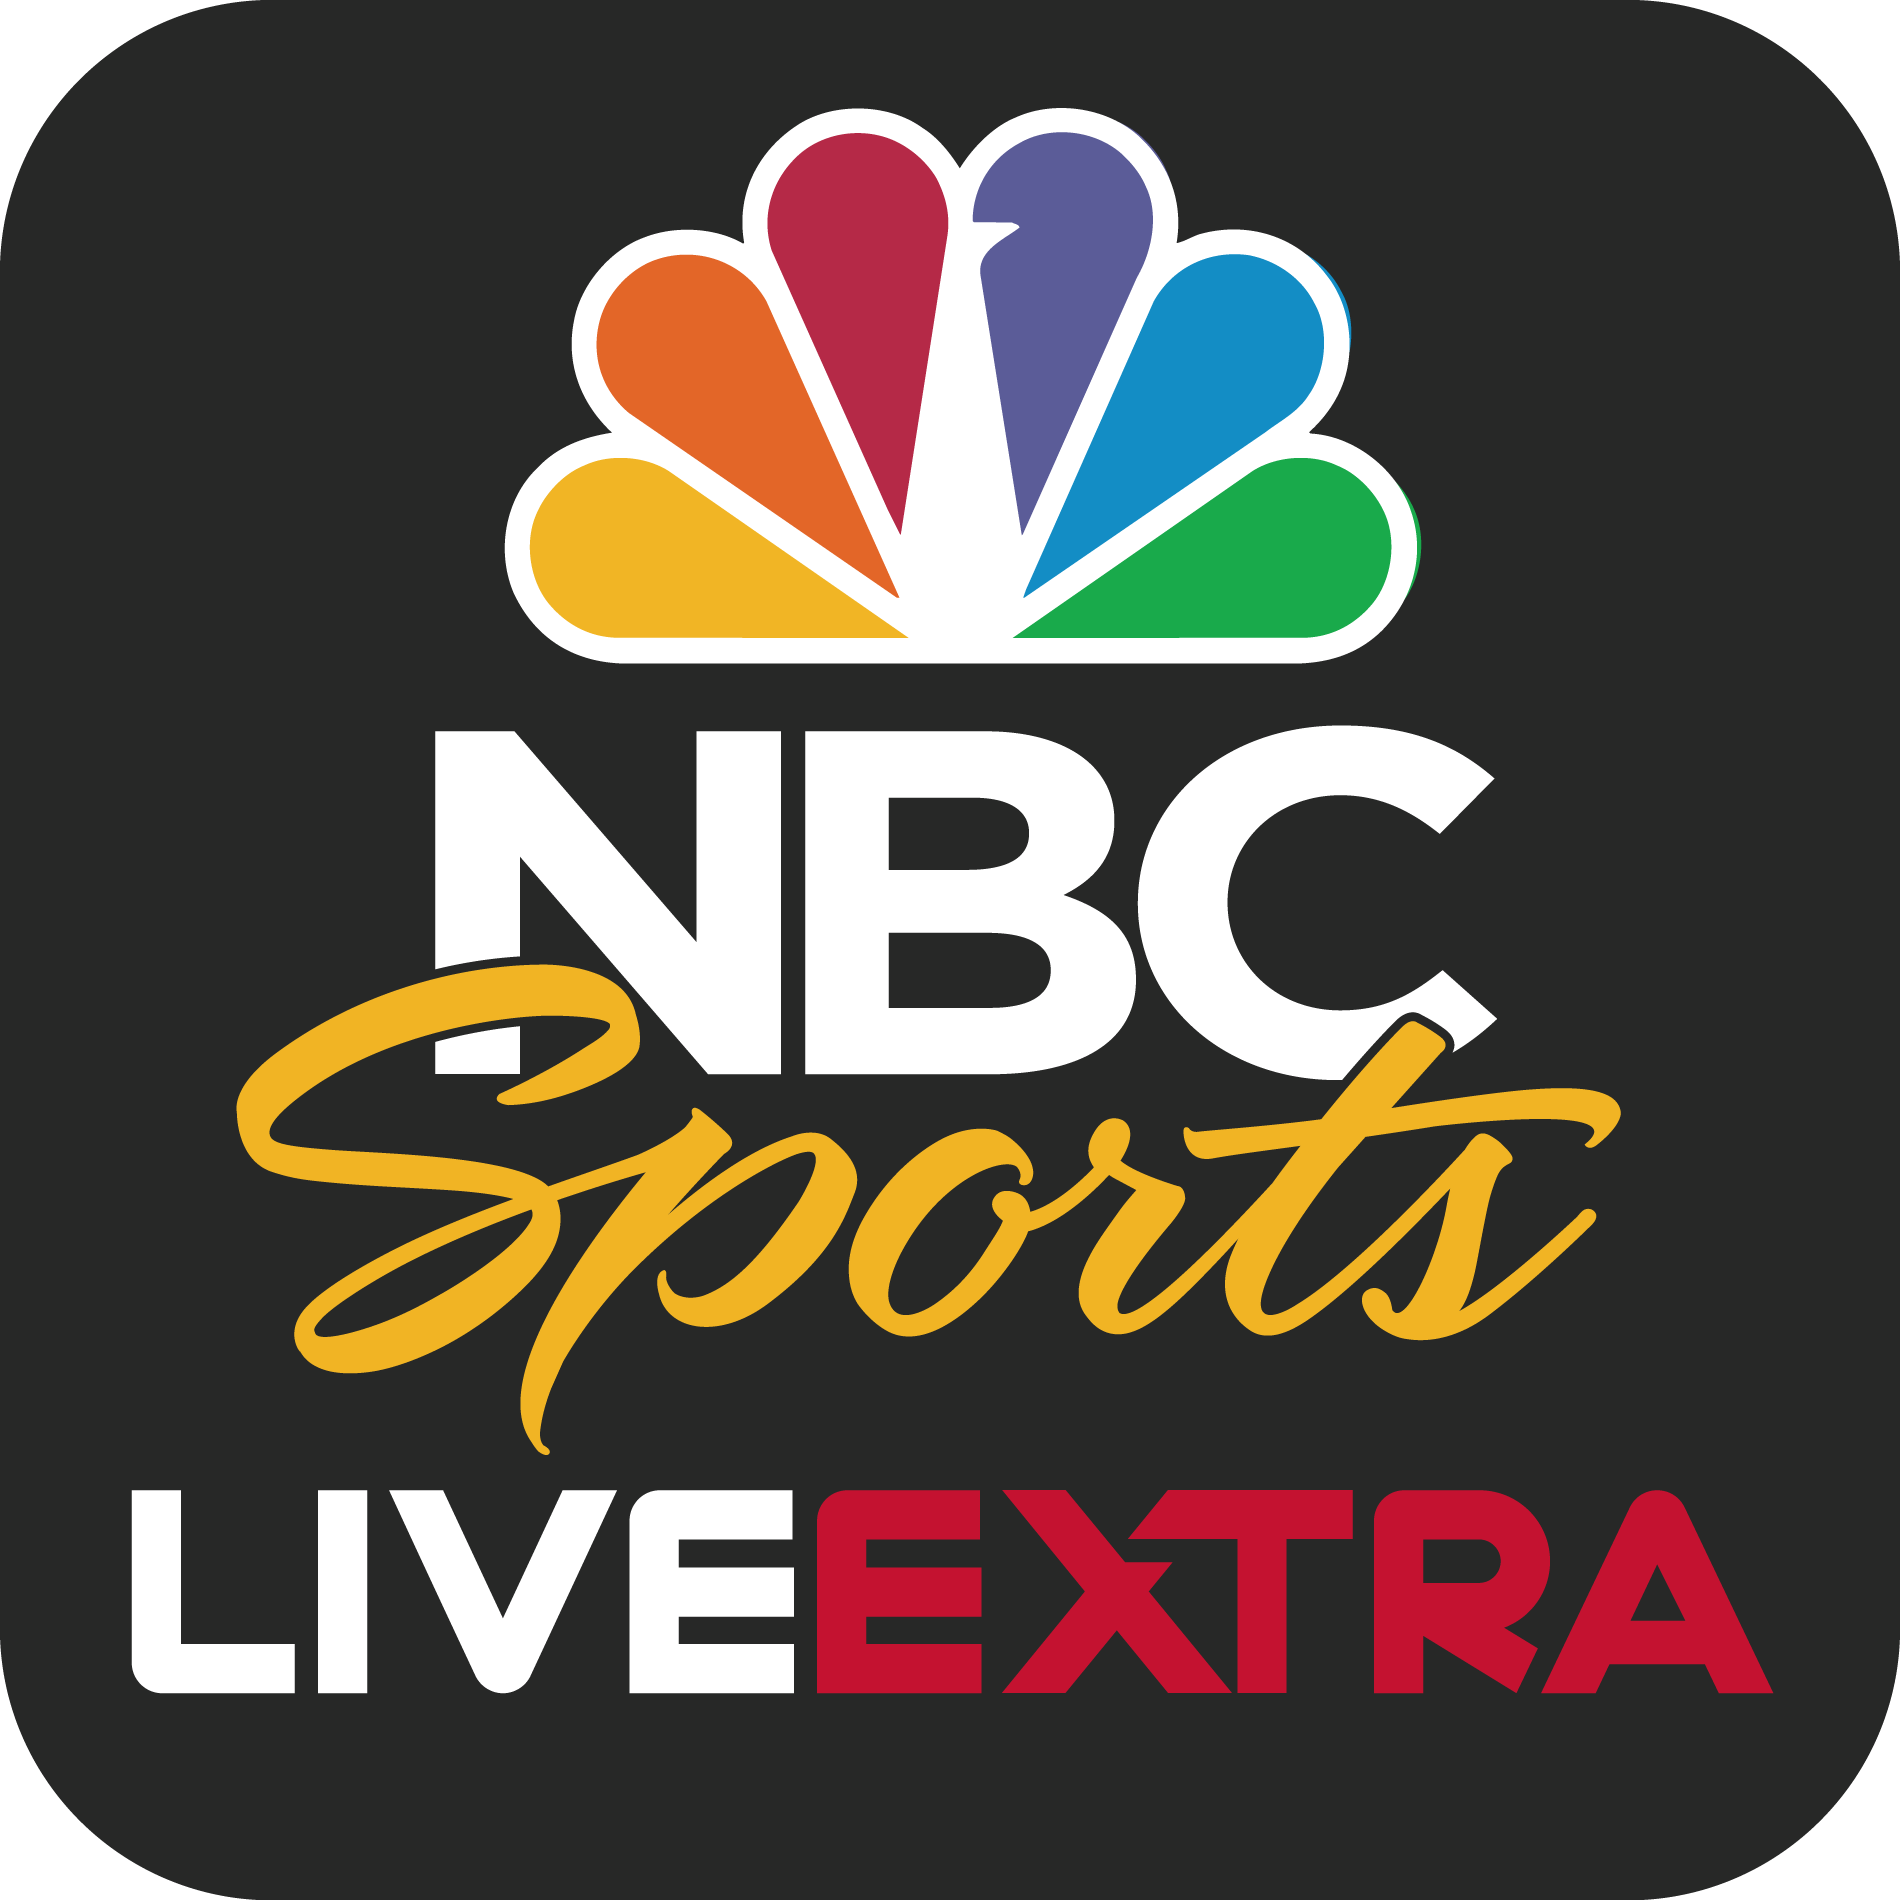 “NBC SPORTS LIVE EXTRA” BEGINS LIVE STREAMING NBC SPORTS NETWORK EVENTS